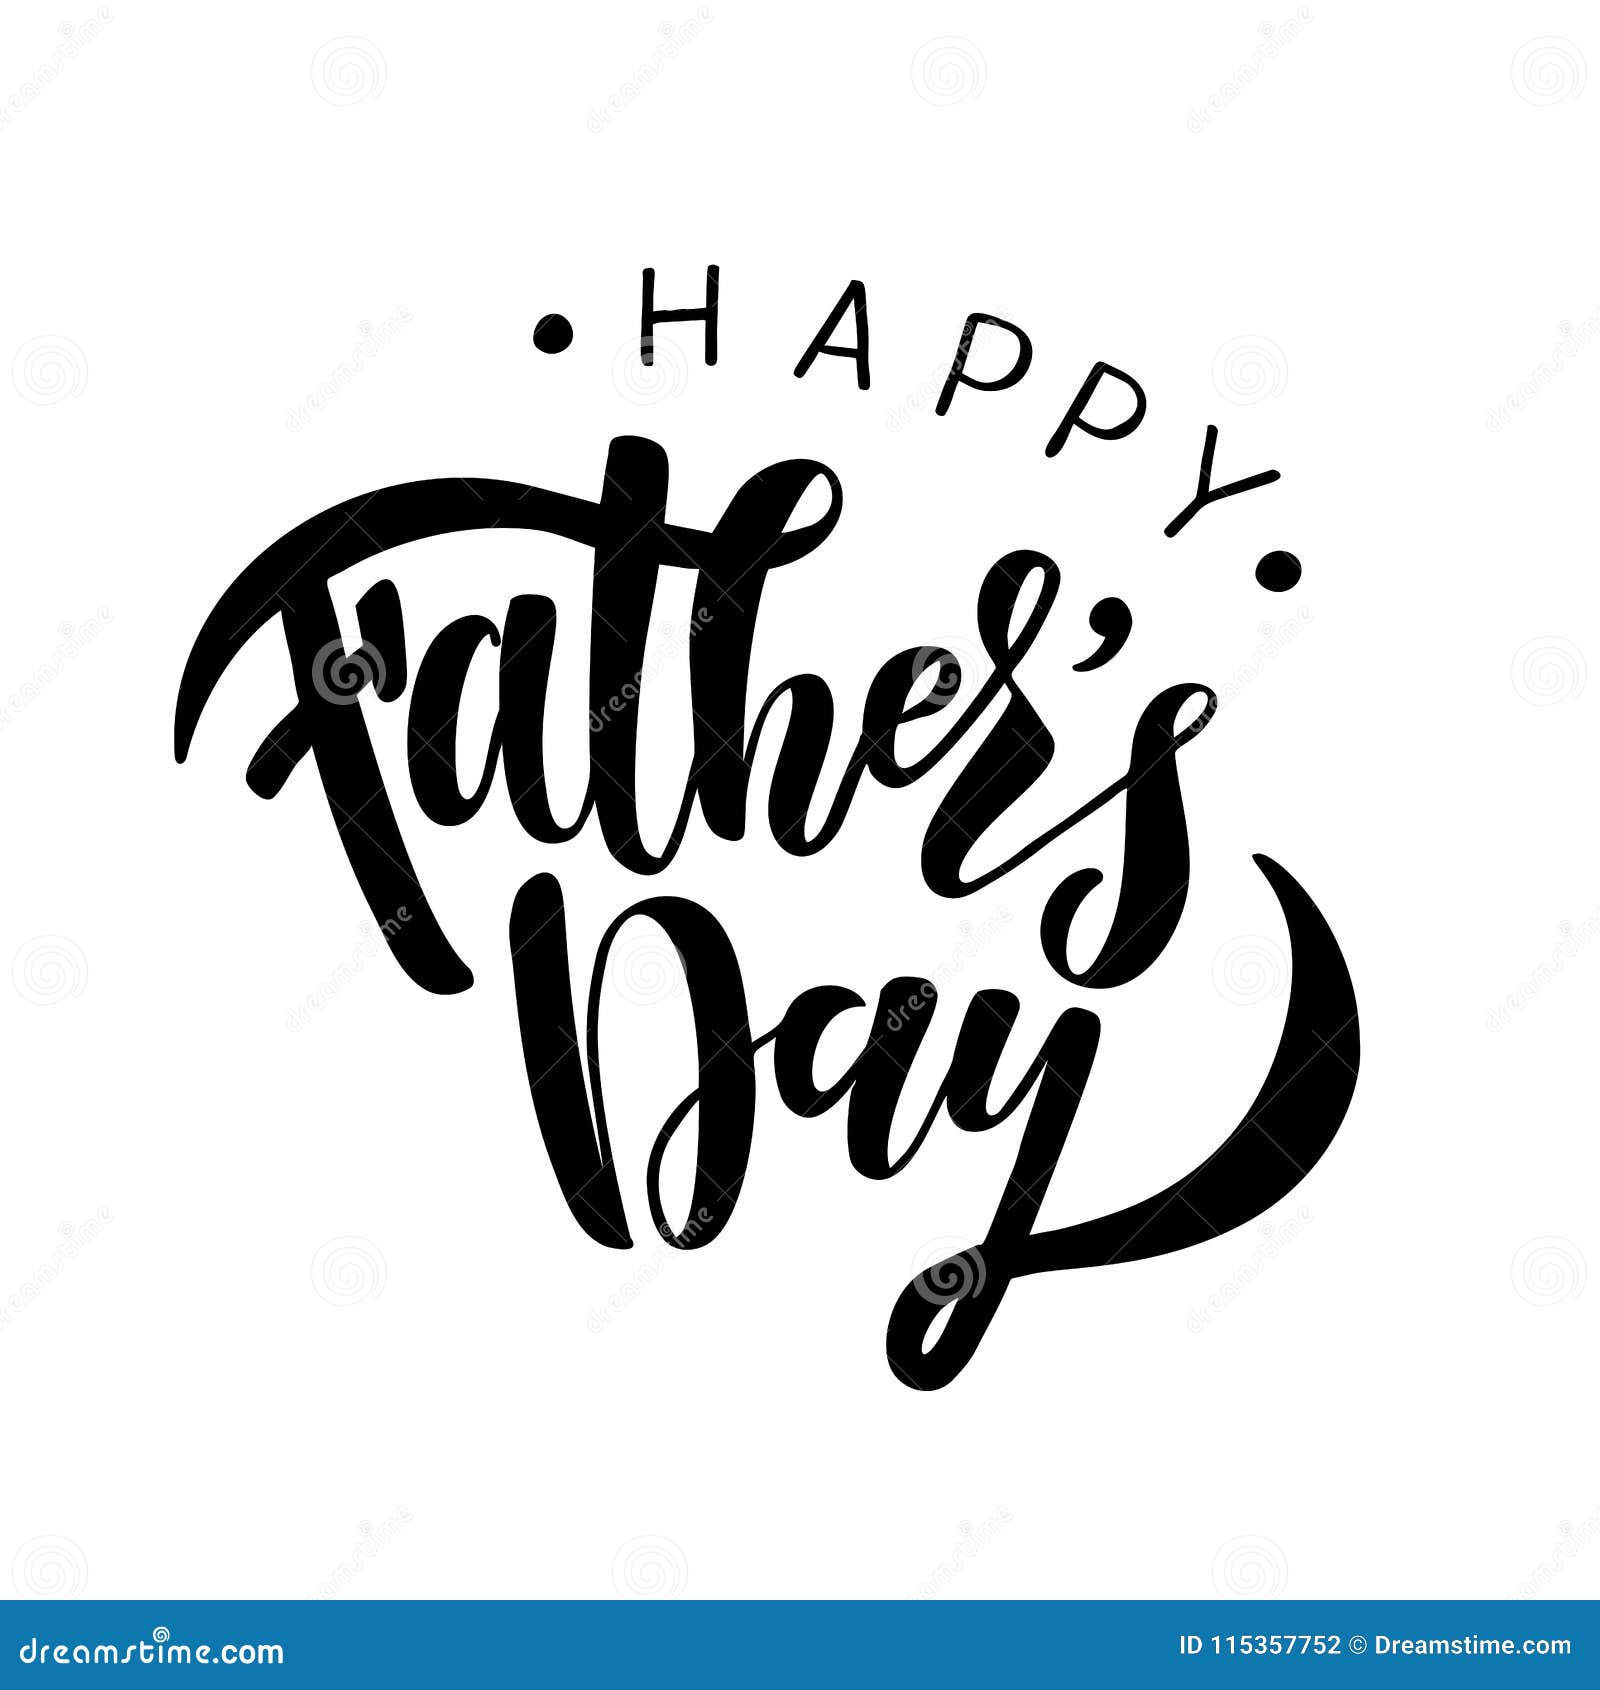 happy-fathers-day-greeting-card-template-stock-illustration